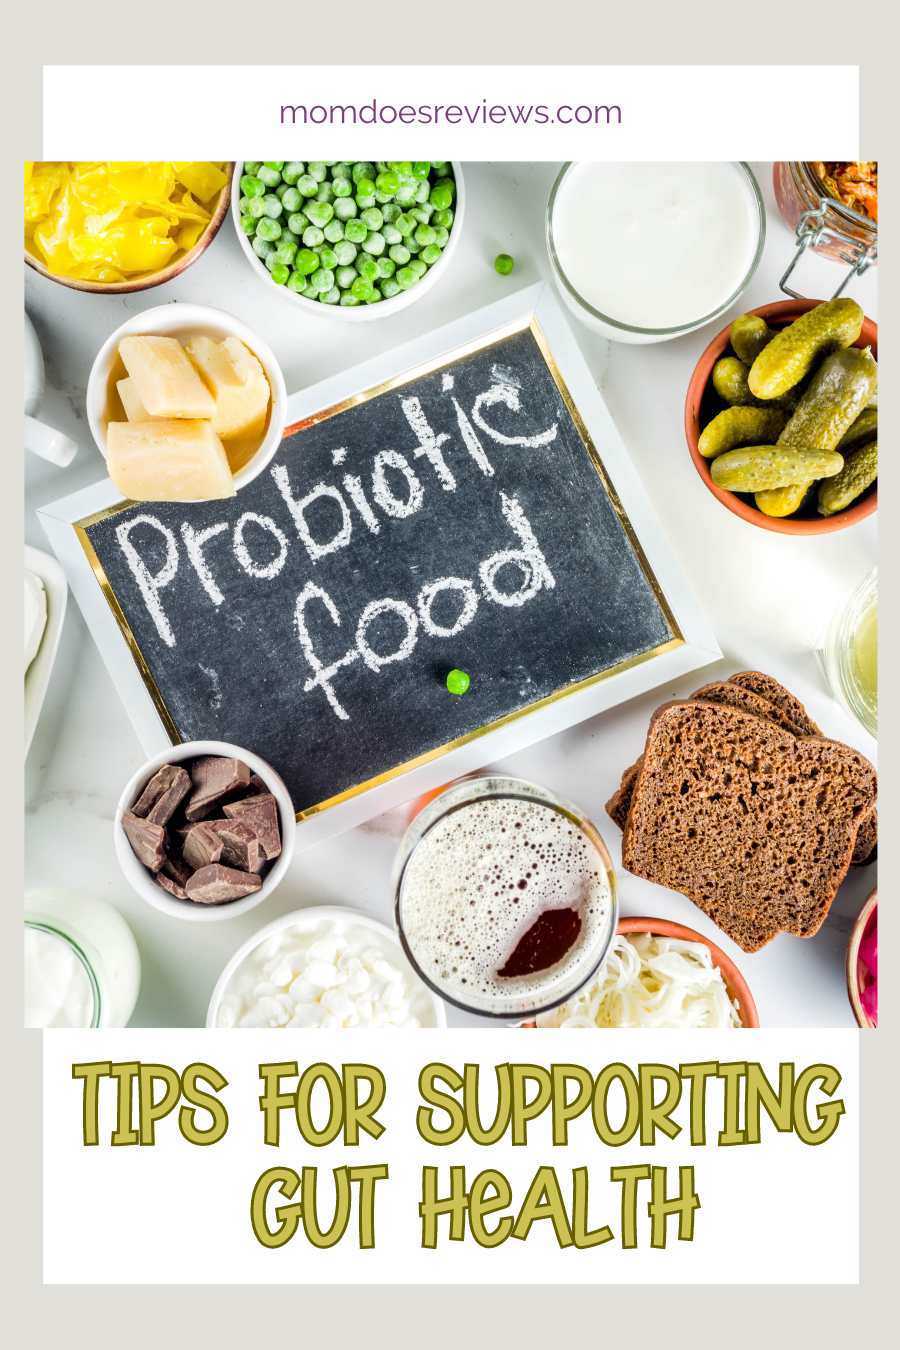 Tips for Supporting Gut Health